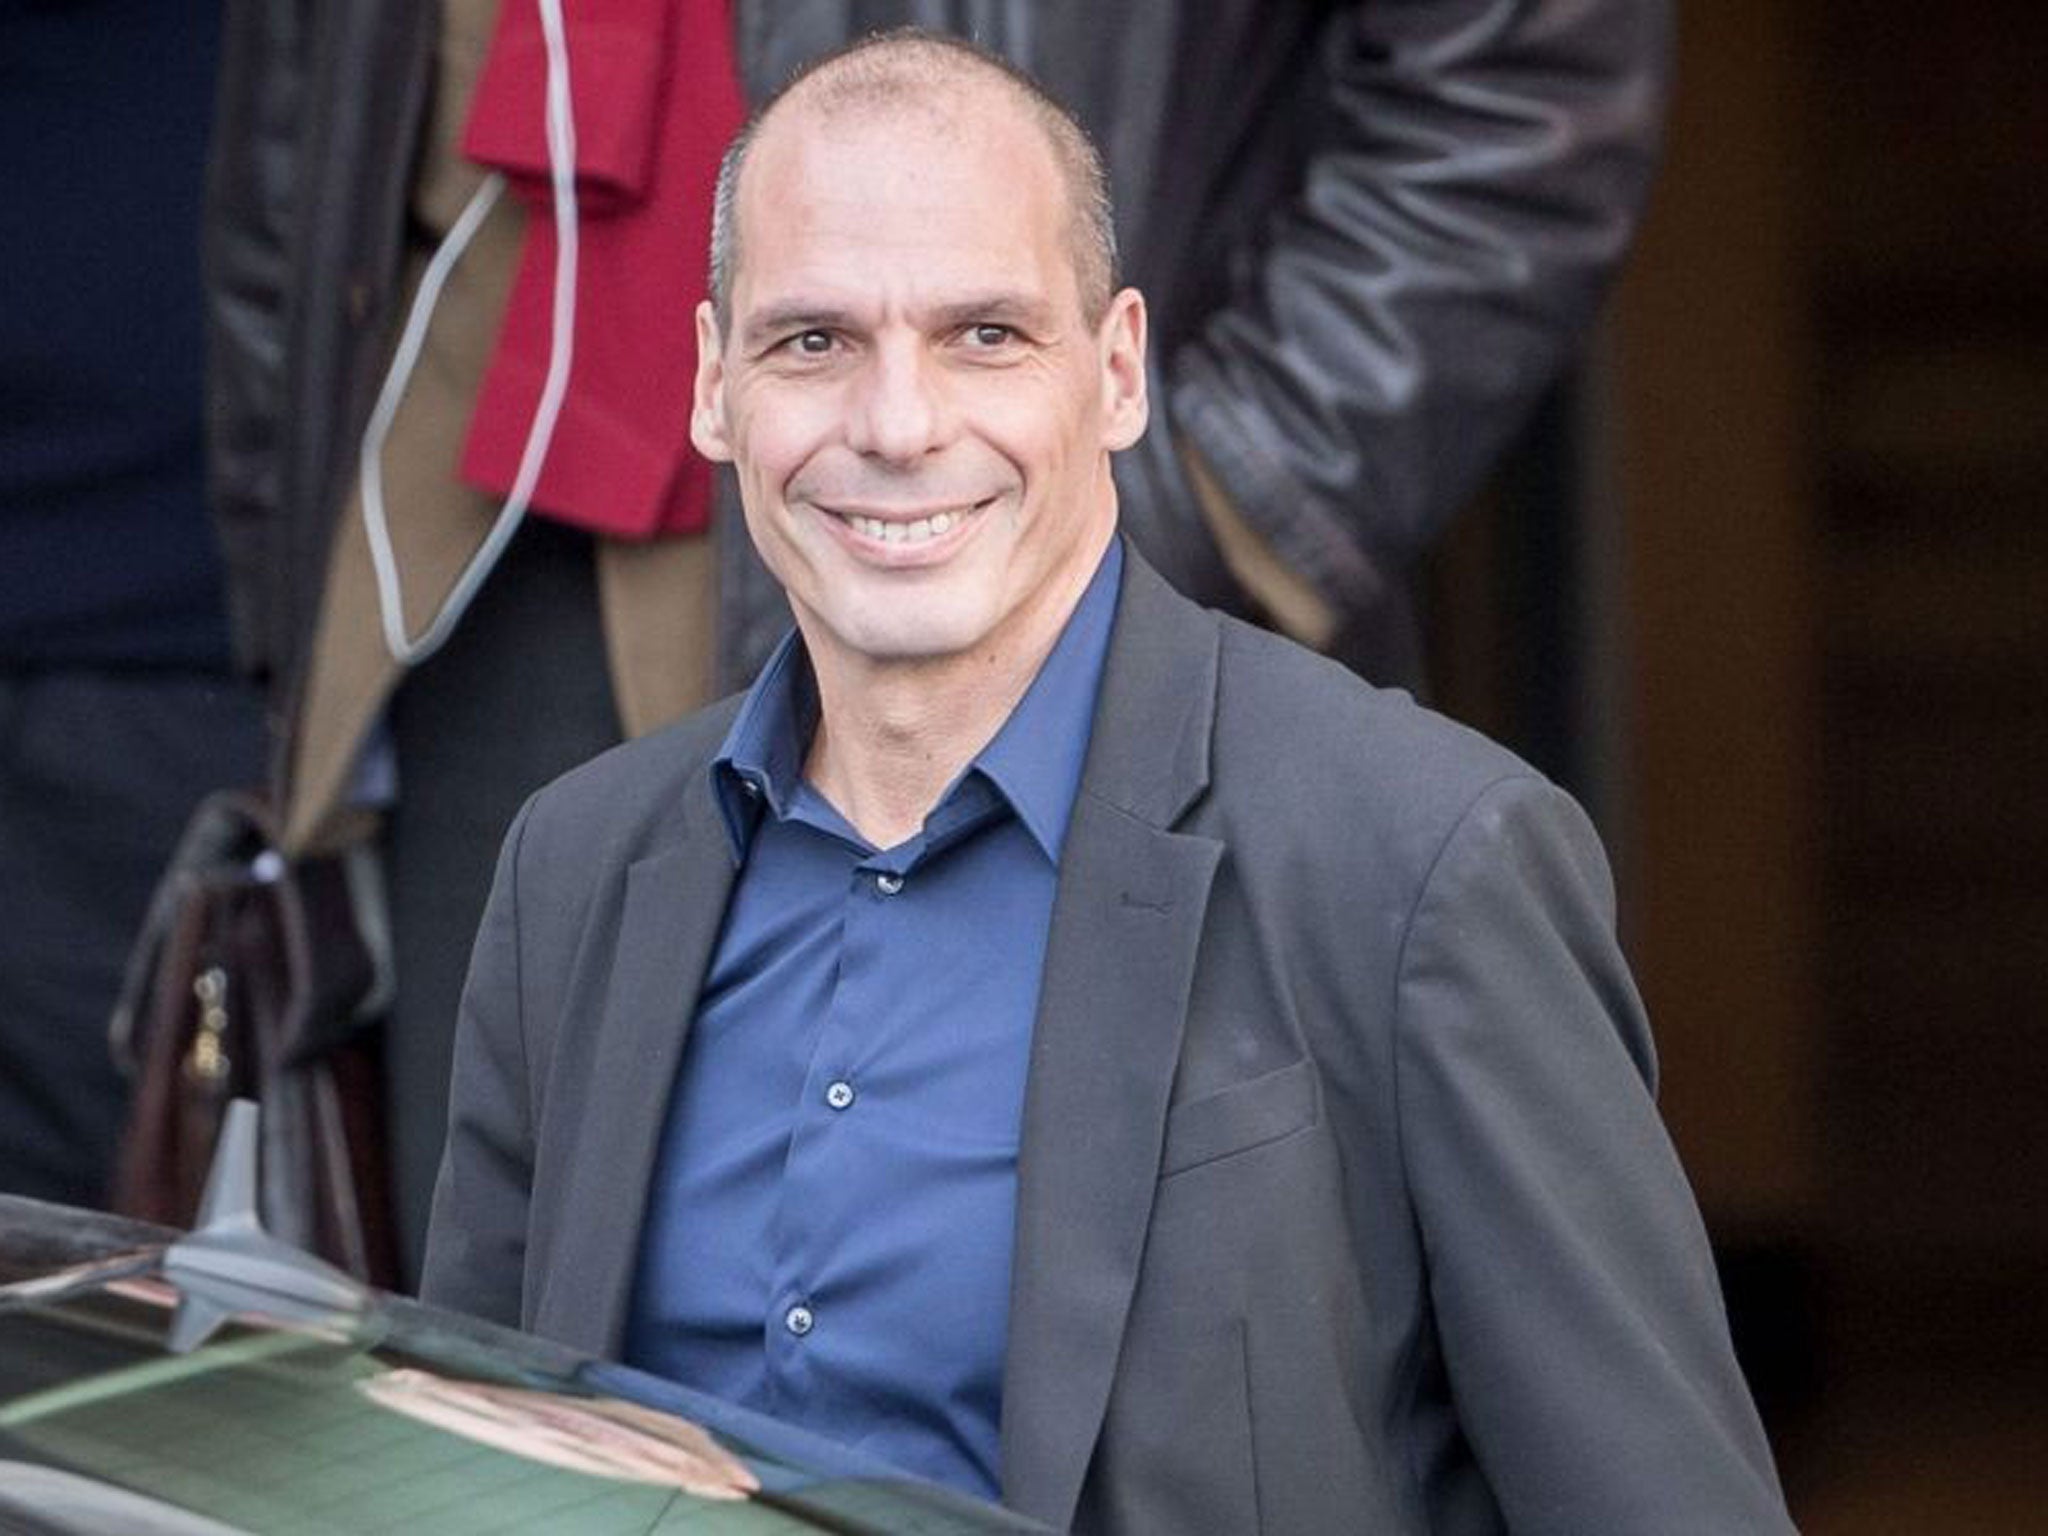 Greek Finance Minister Yanis Varoufakis arrives at the German Finance Ministry to take part in bilateral talks with his German counterpart Schaeuble in Berlin, Germany, on 5 February, 2015